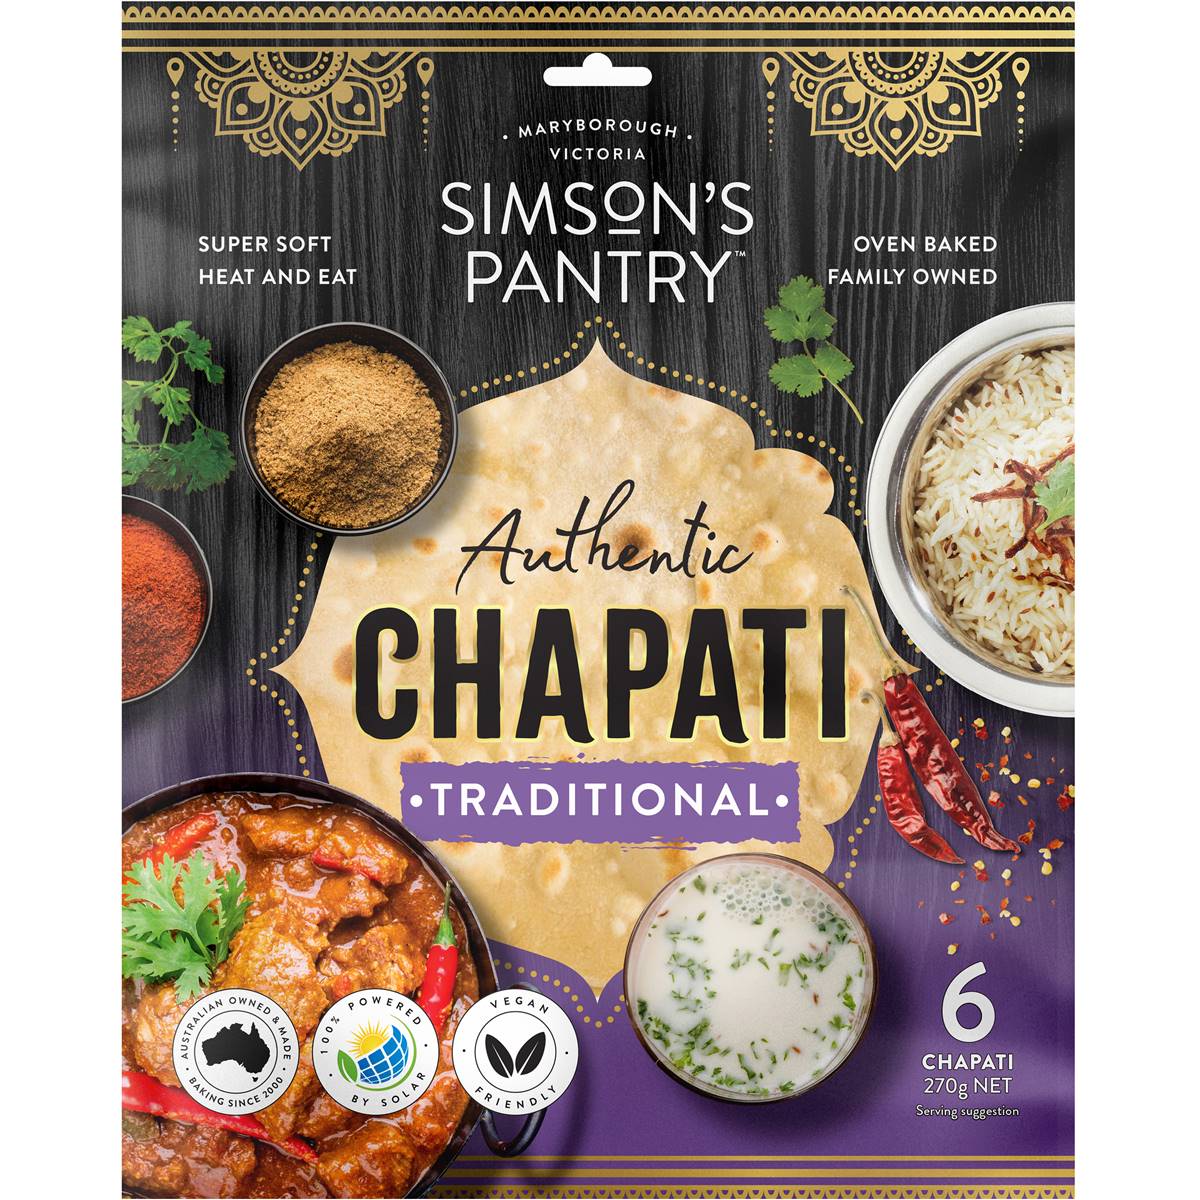 Calories in Simson's Pantry Authentic Chapati Traditional